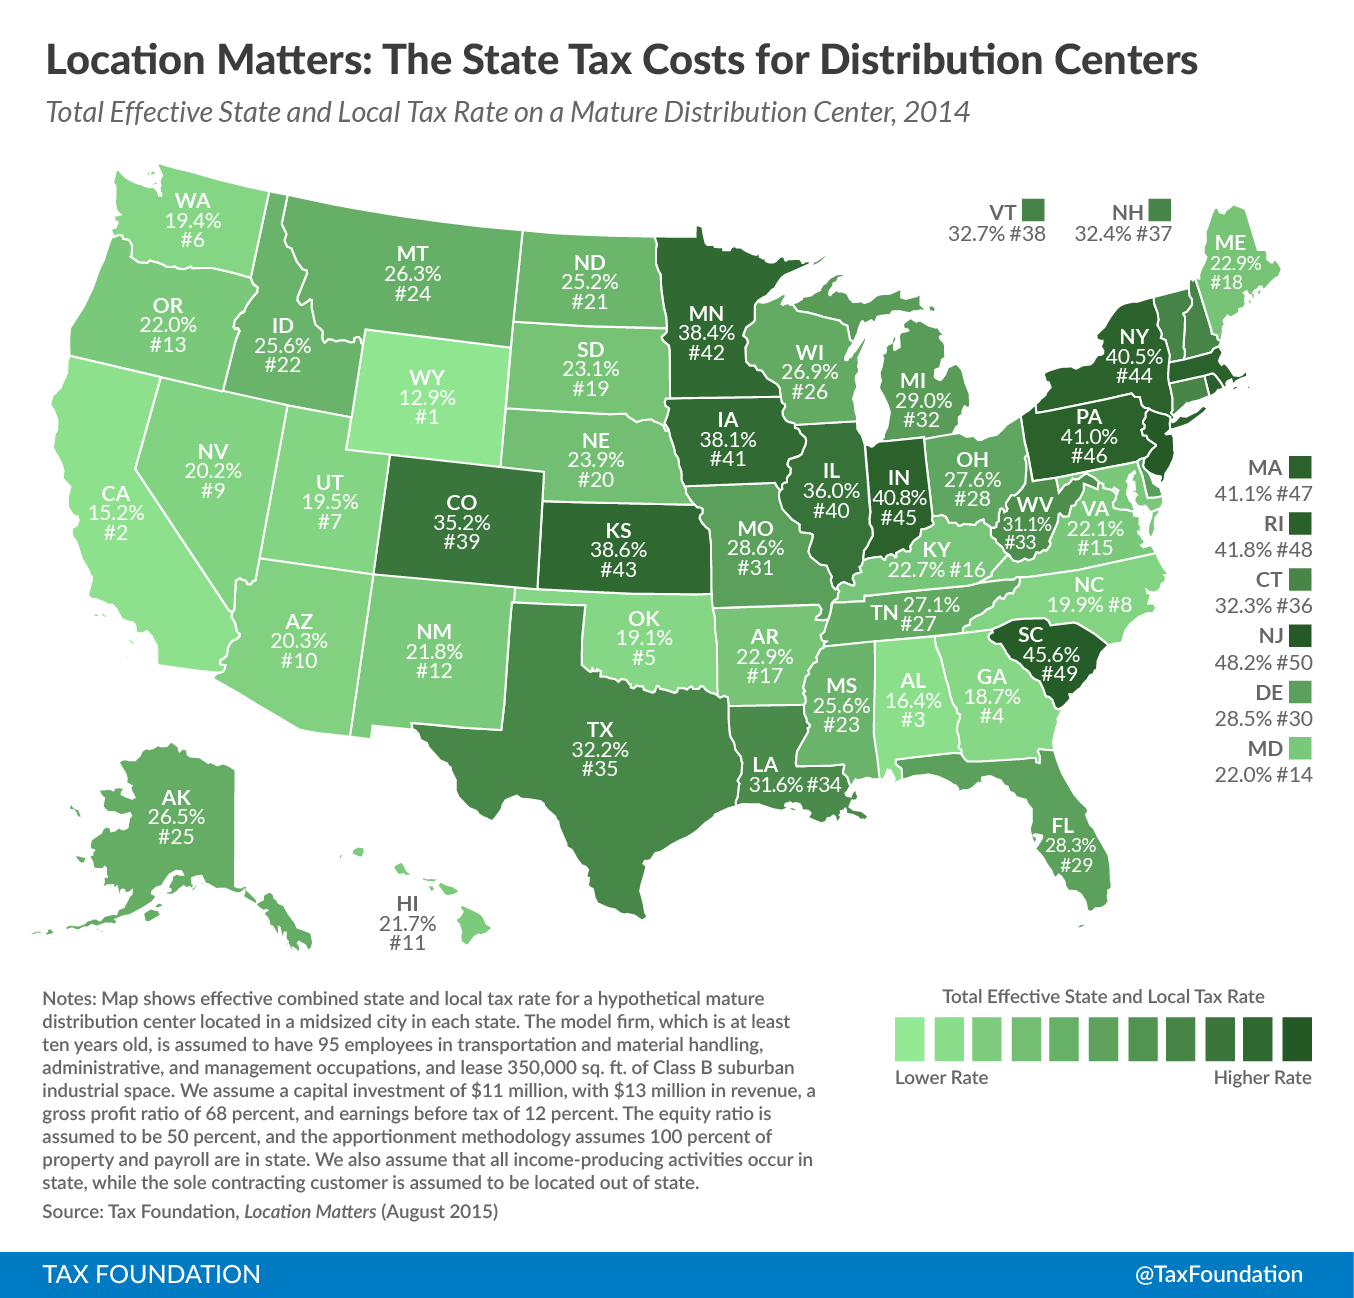 Location Matters - Call Centers